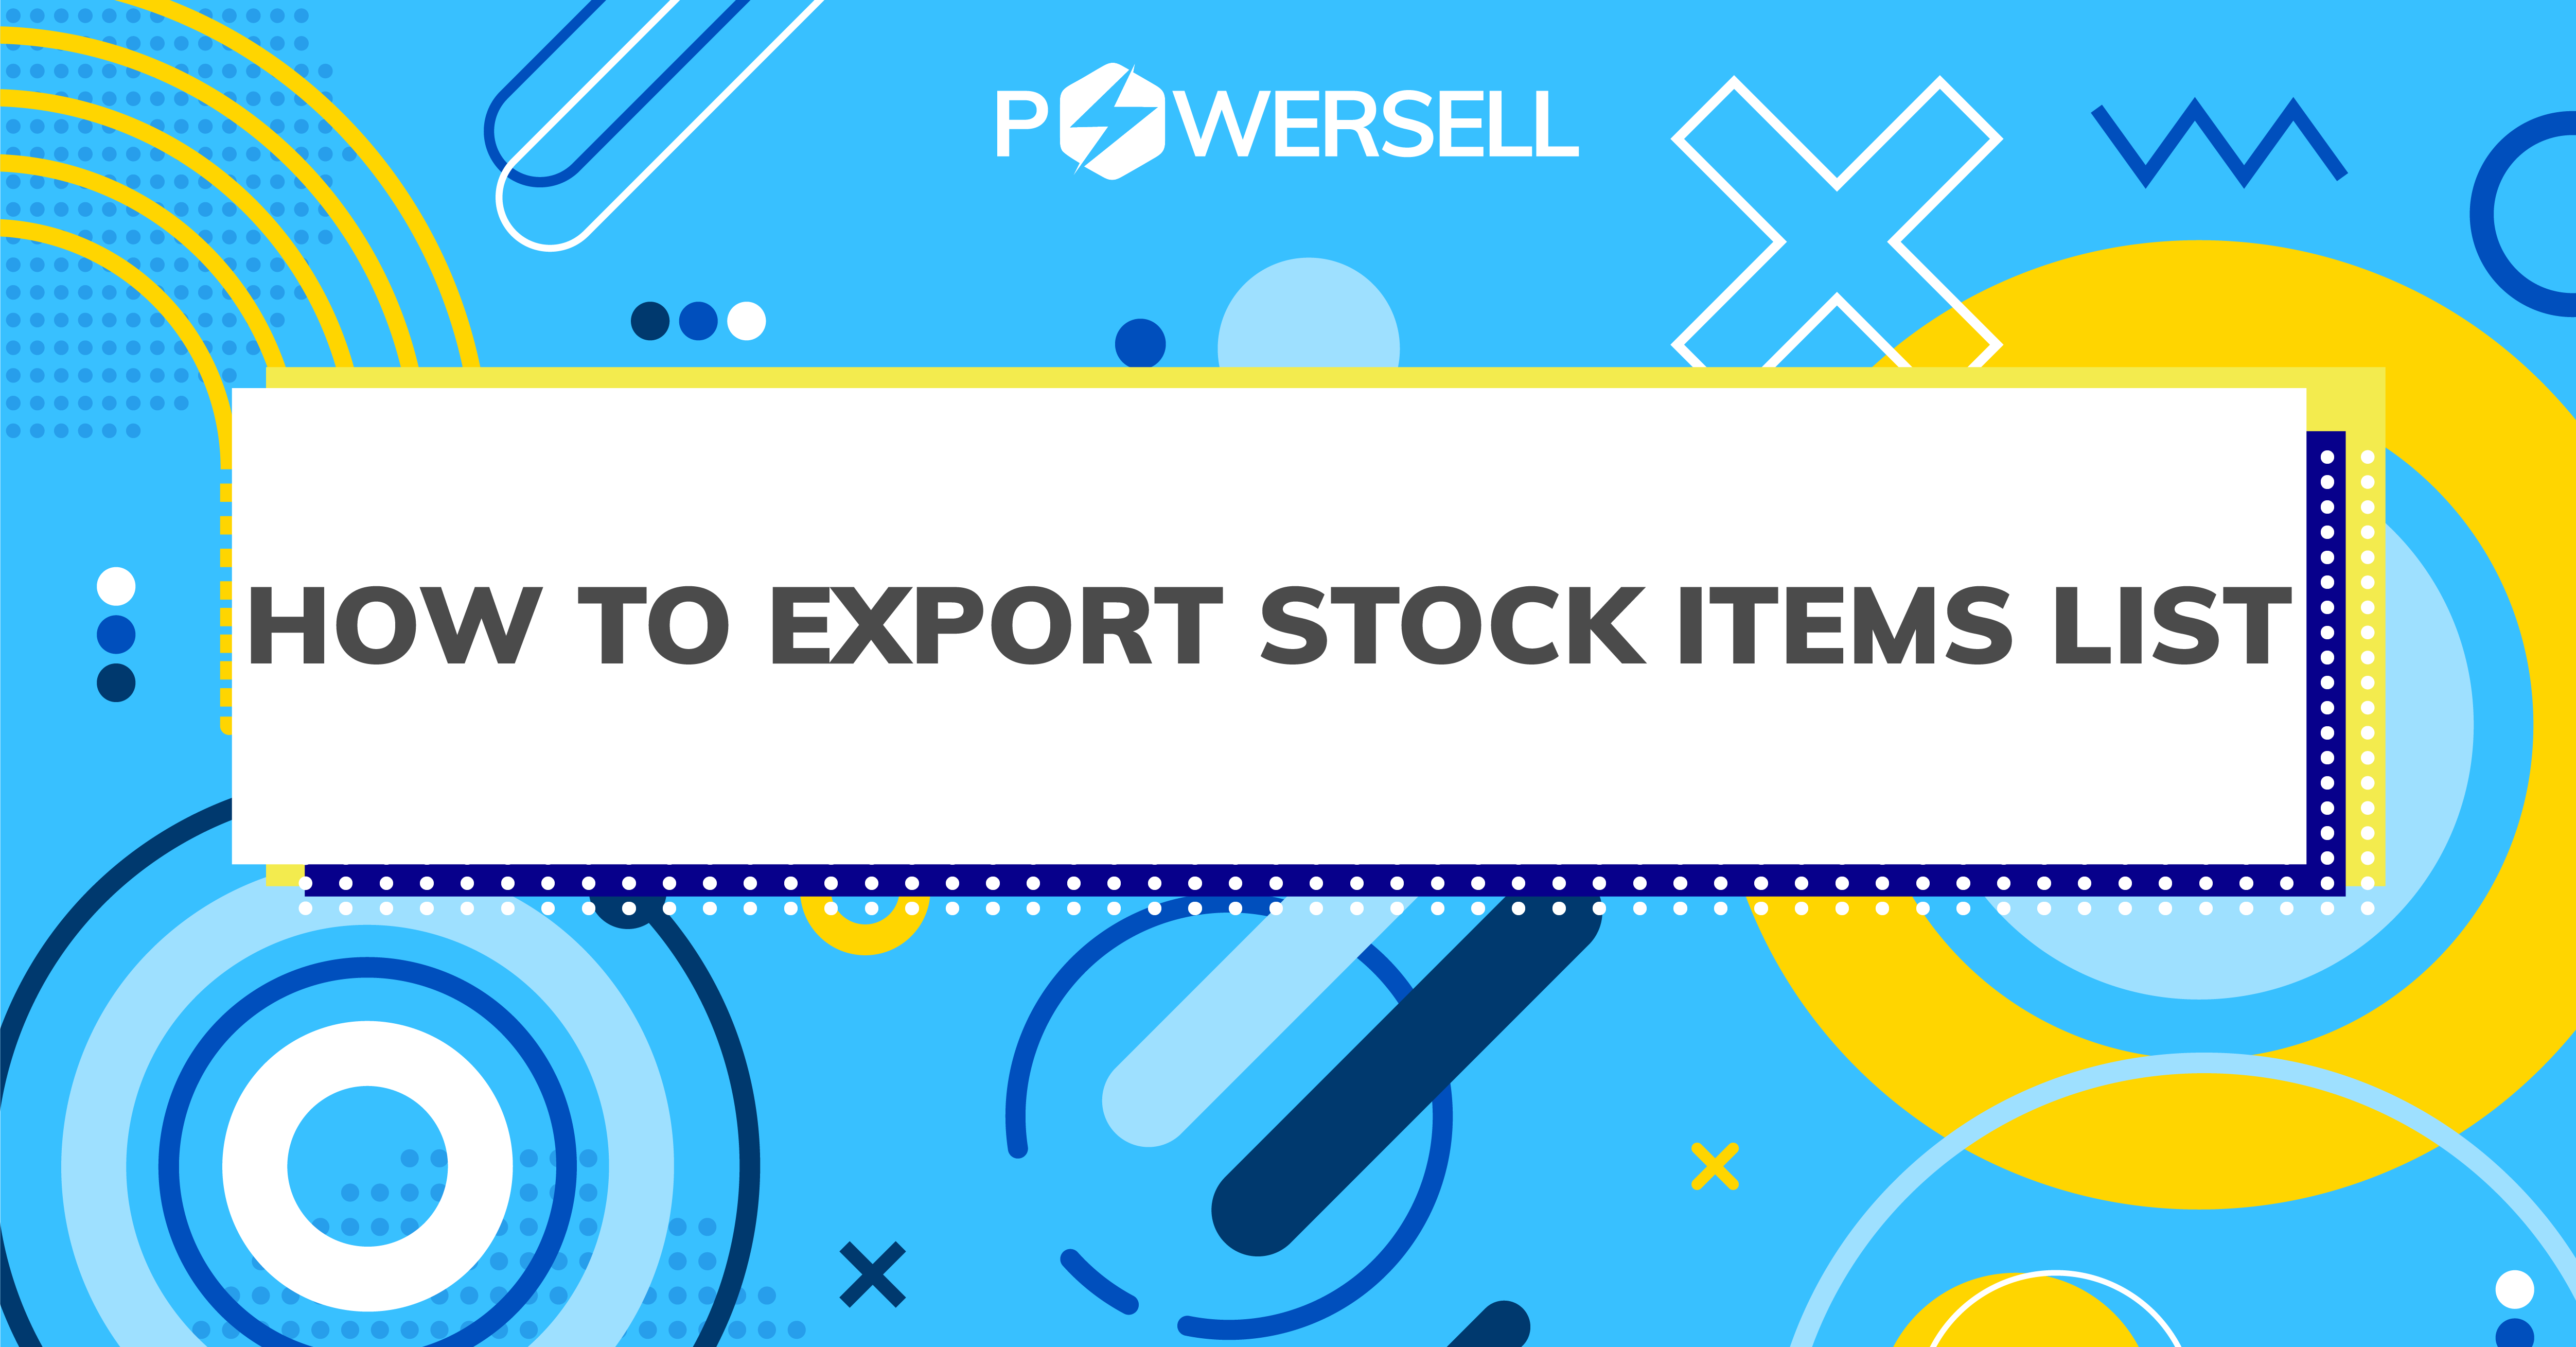 HOW TO EXPORT STOCK ITEMS LIST